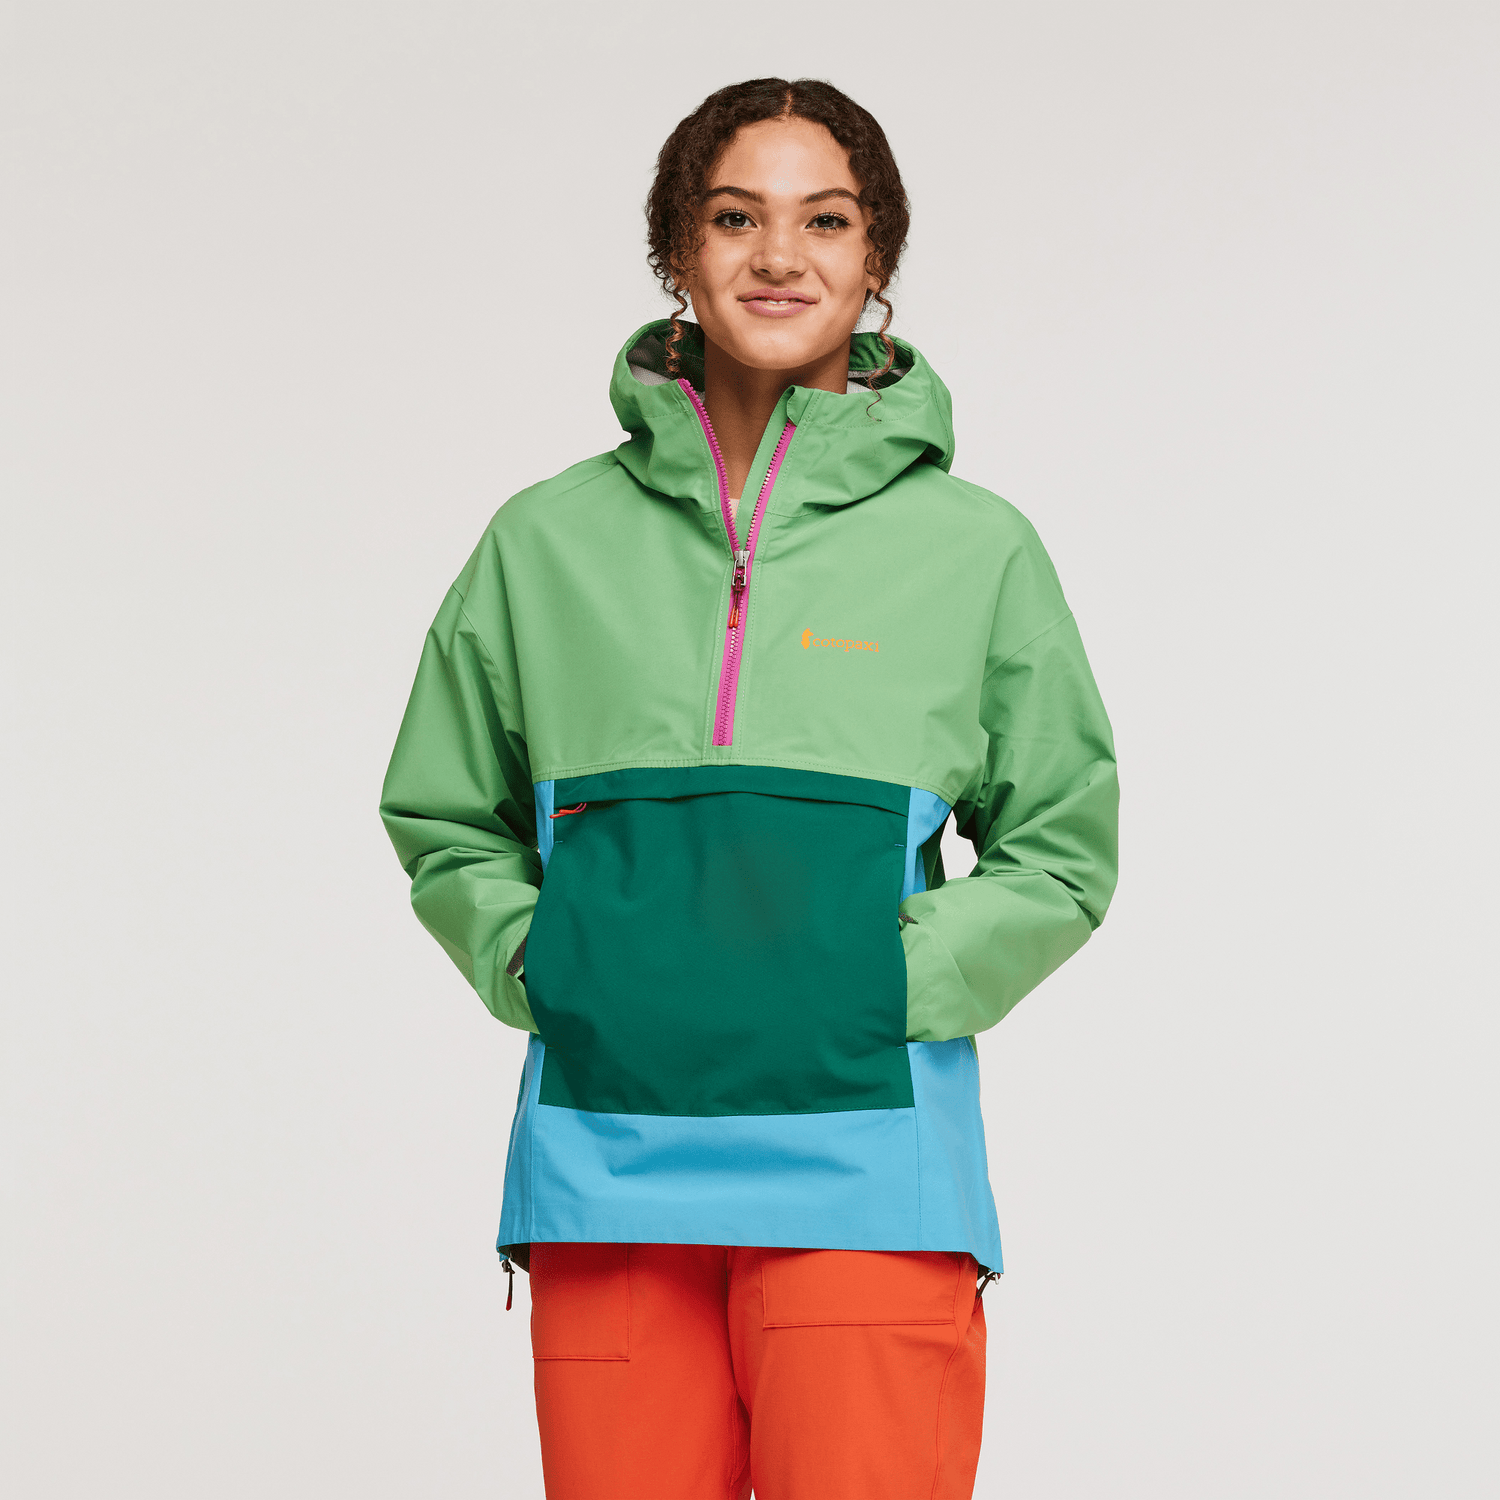 Cotopaxi - W's Cielo Rain Anorak - 100% Recycled Polyester - Weekendbee - sustainable sportswear